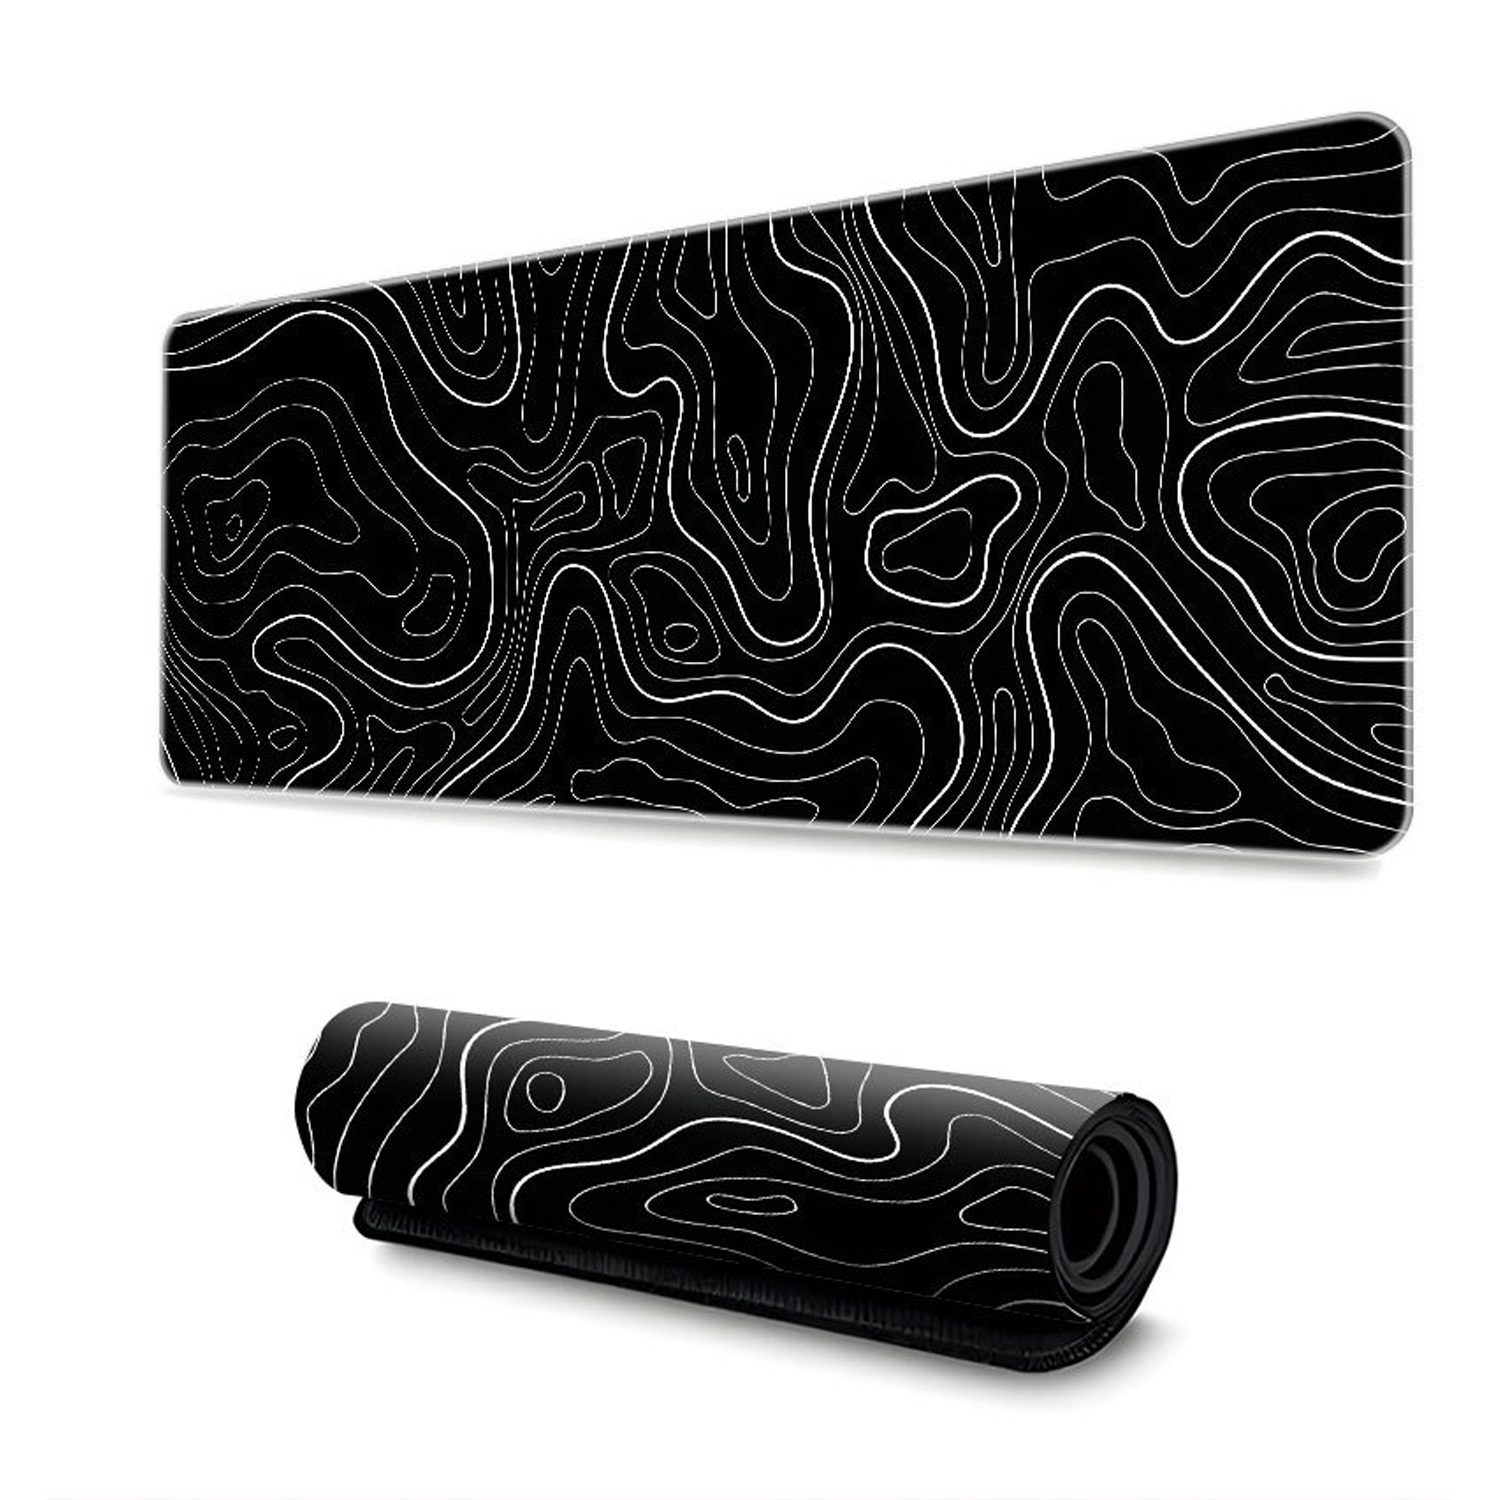 Large Mouse Pad 900*400mm Size,Anti-Skid Gaming Mouse Pad Office Desk Mat Desk Pad for Computers Laptop